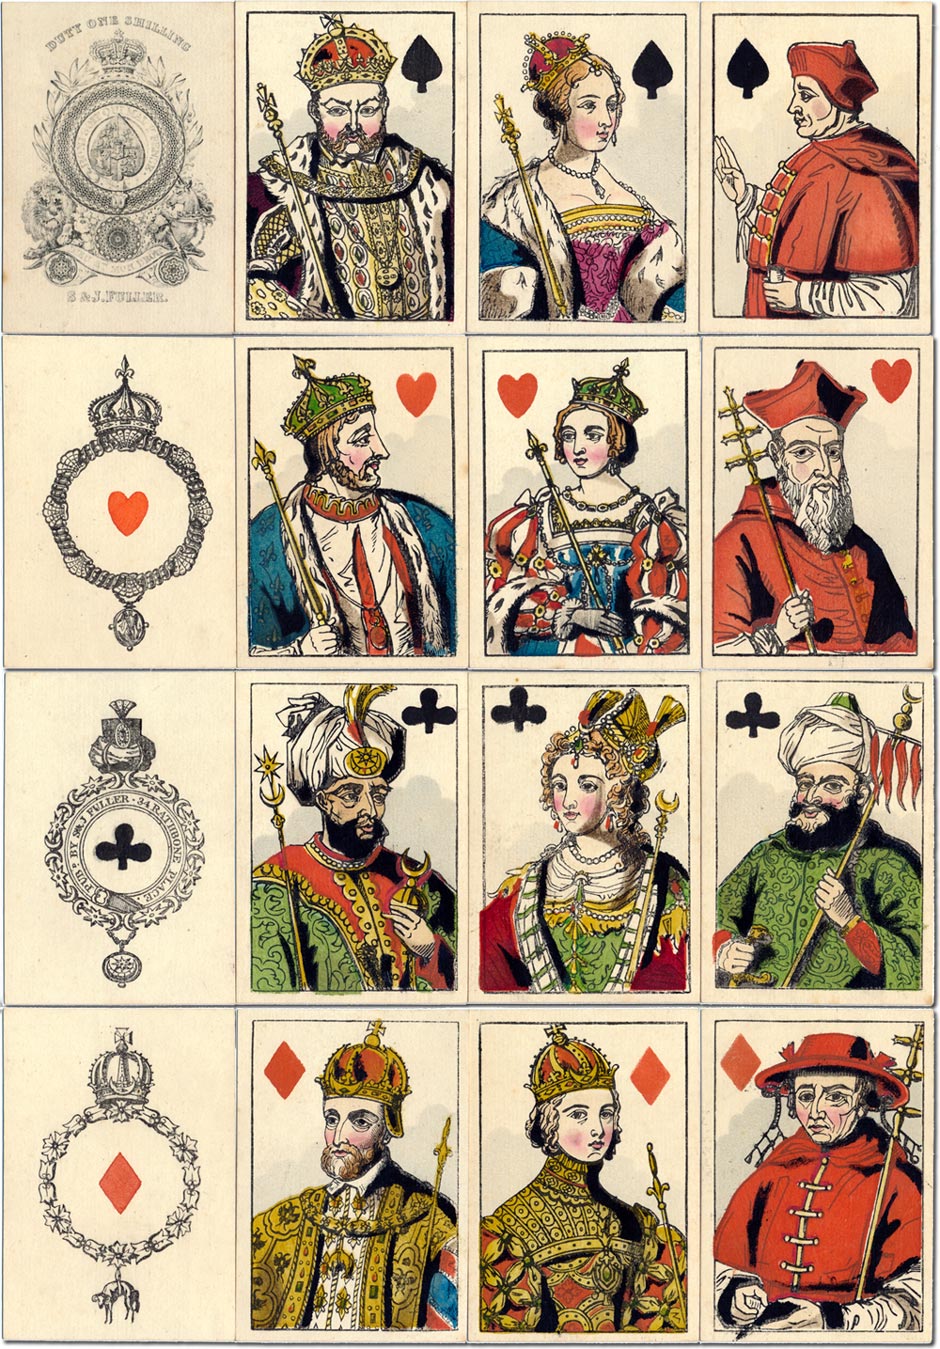 Imperial Royal playing cards published by S. & J. Fuller, 1828